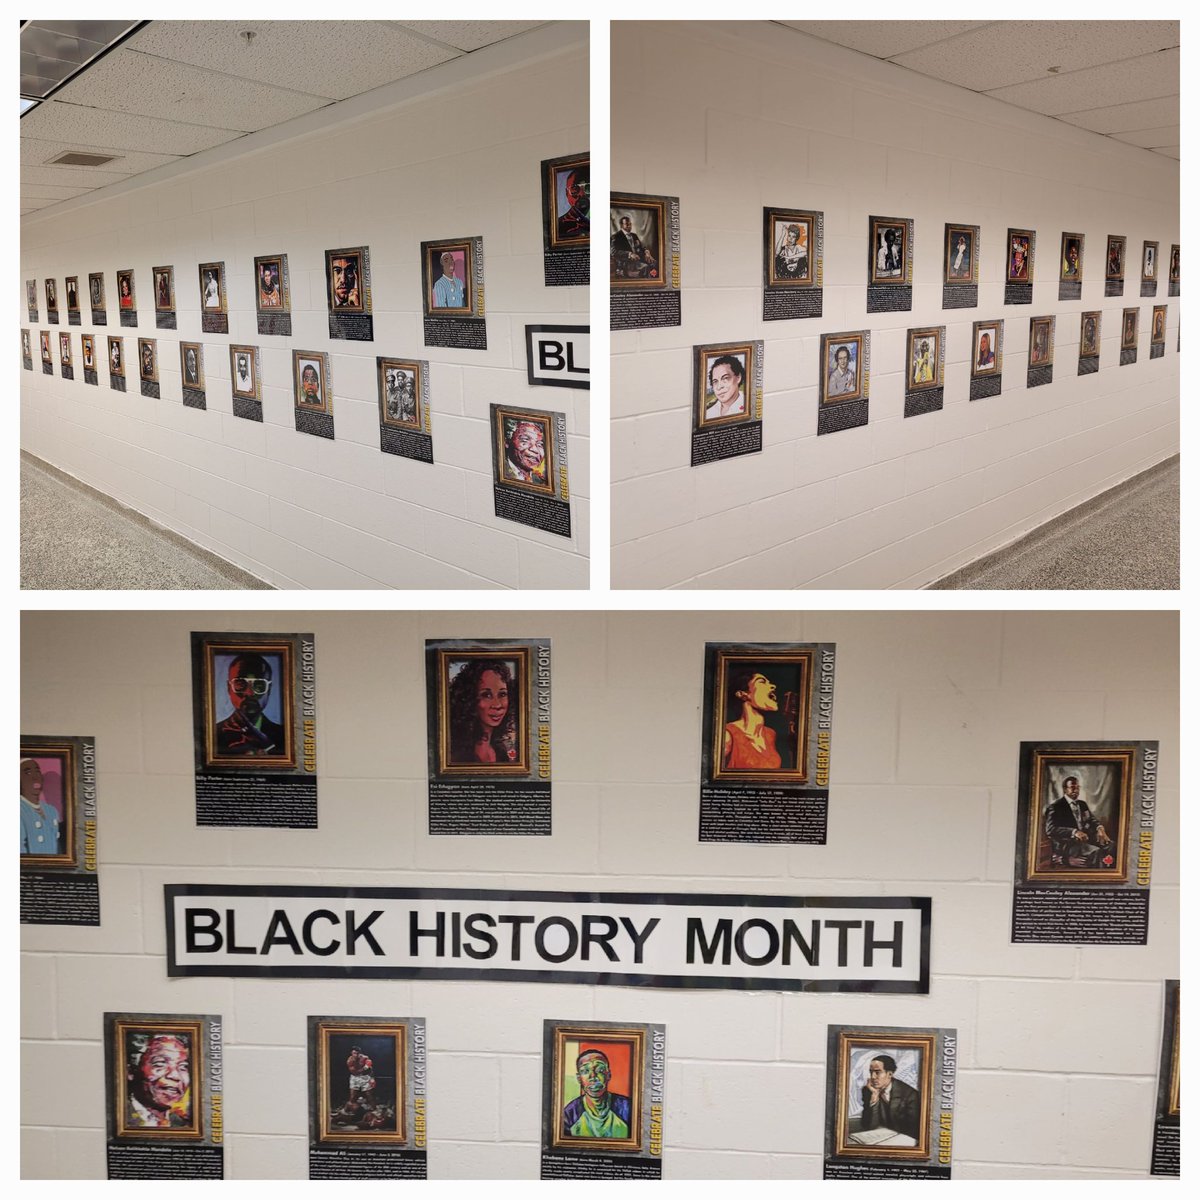 Went to a basketball game last night and spent some time checking out the Black History Month display @RuralCRHS. 
#blackhistoryiscanadianhistory 
@PSBPEI 
@EducationPEI